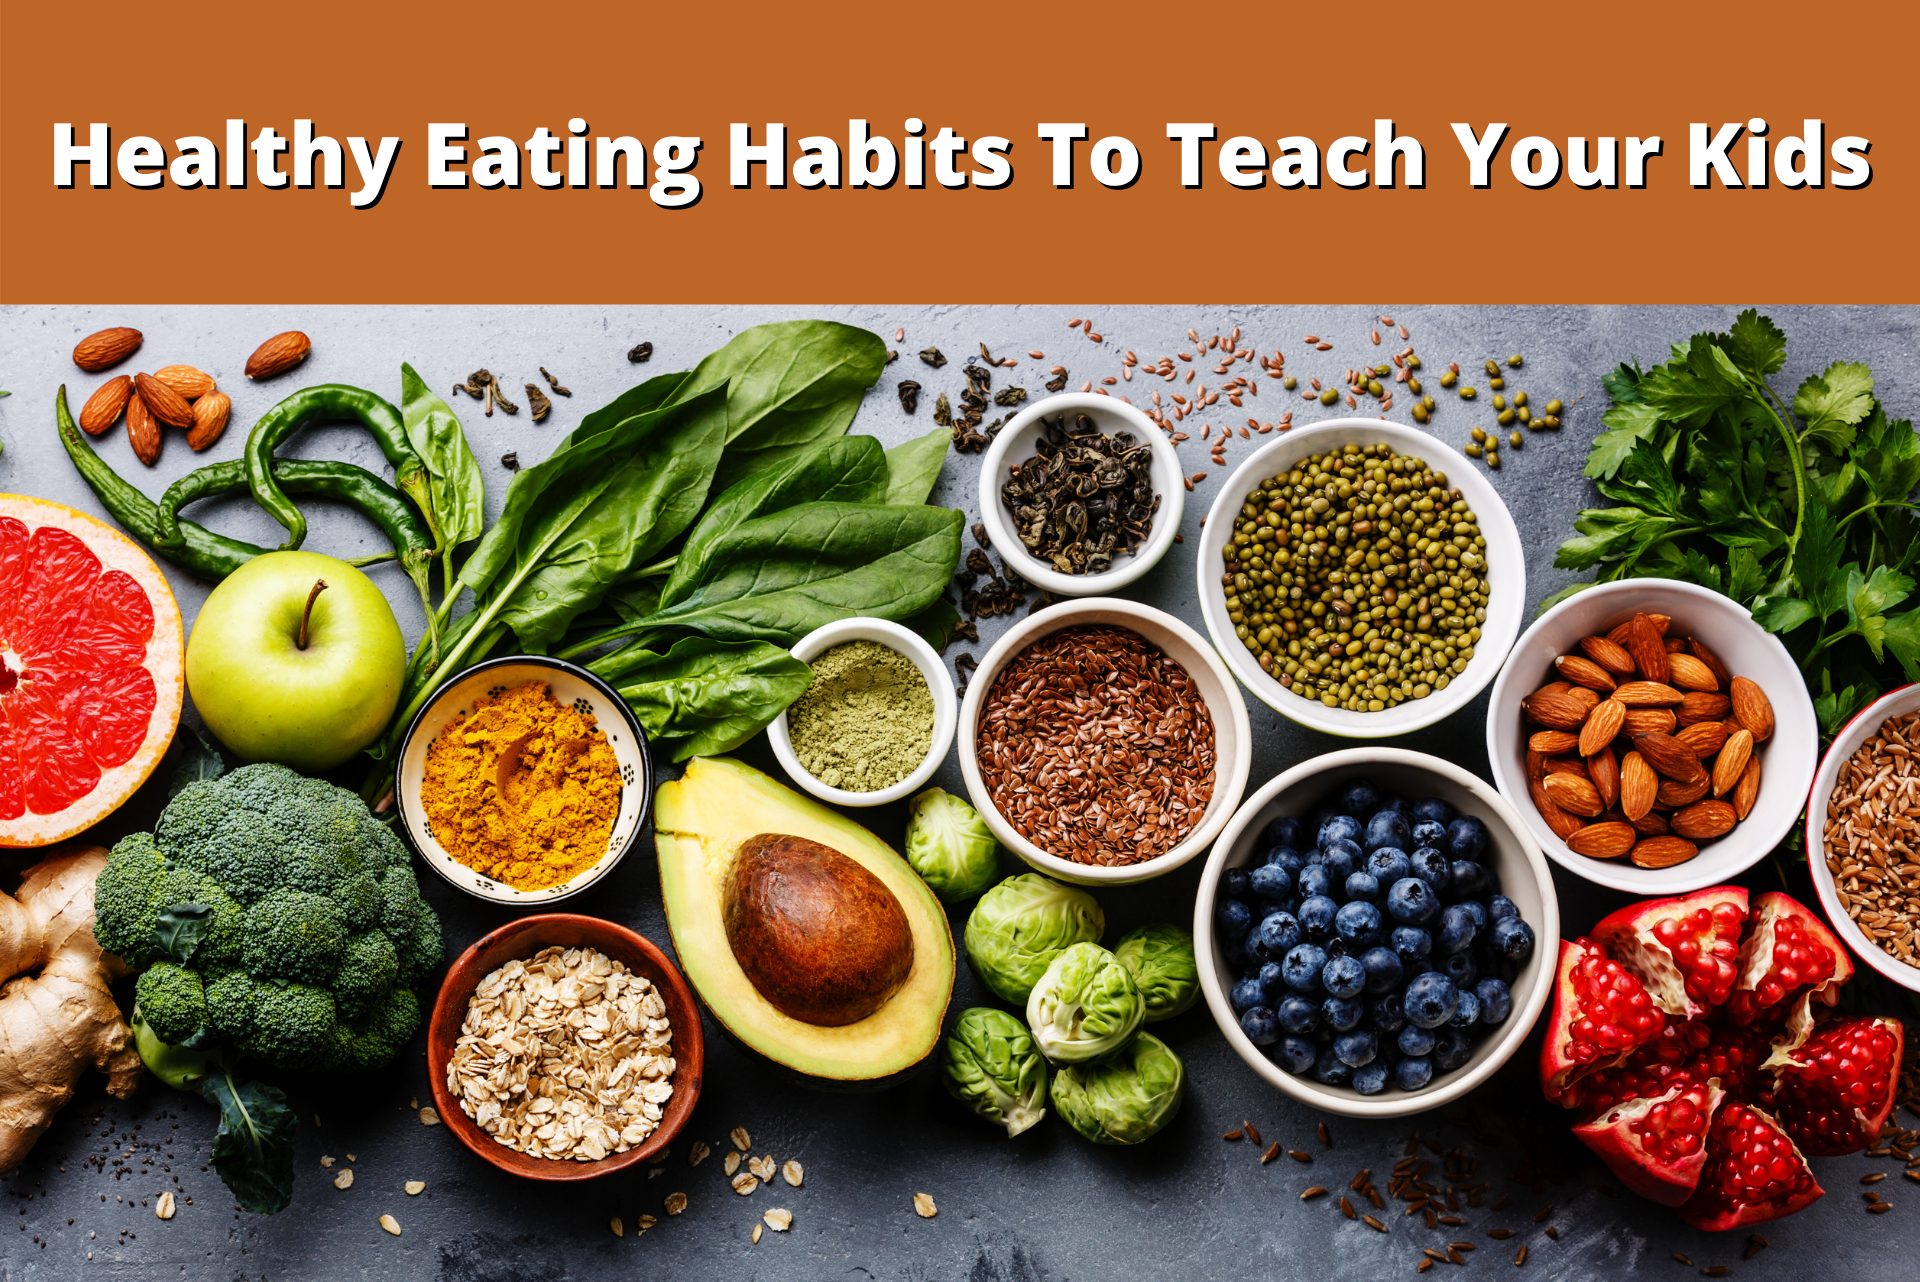 give a talk on eating habits in your country